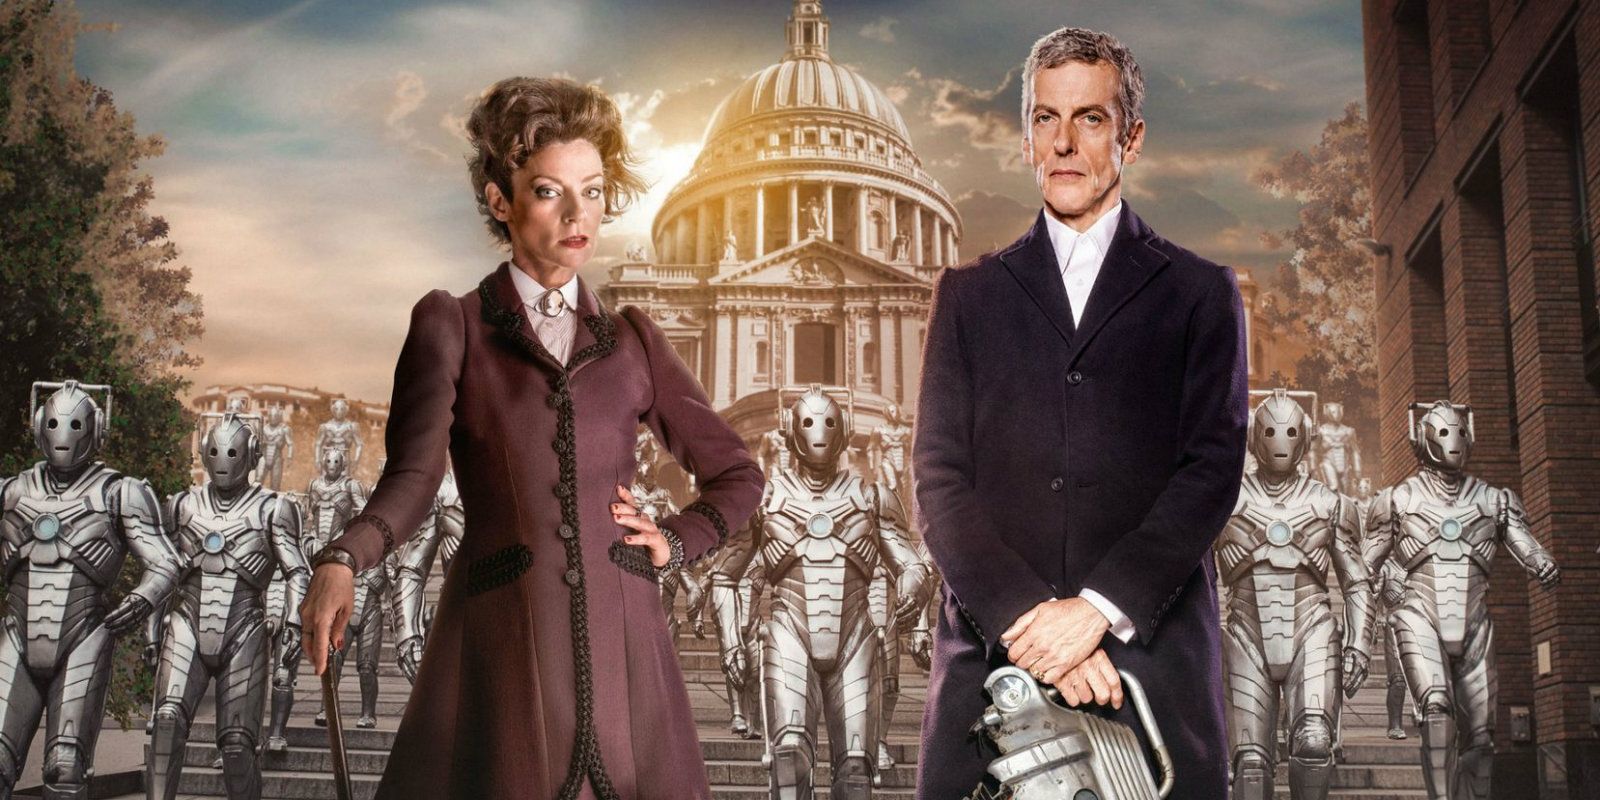 Doctor Who - Missy (Michelle Gomez) and Peter Capaldi's Doctor